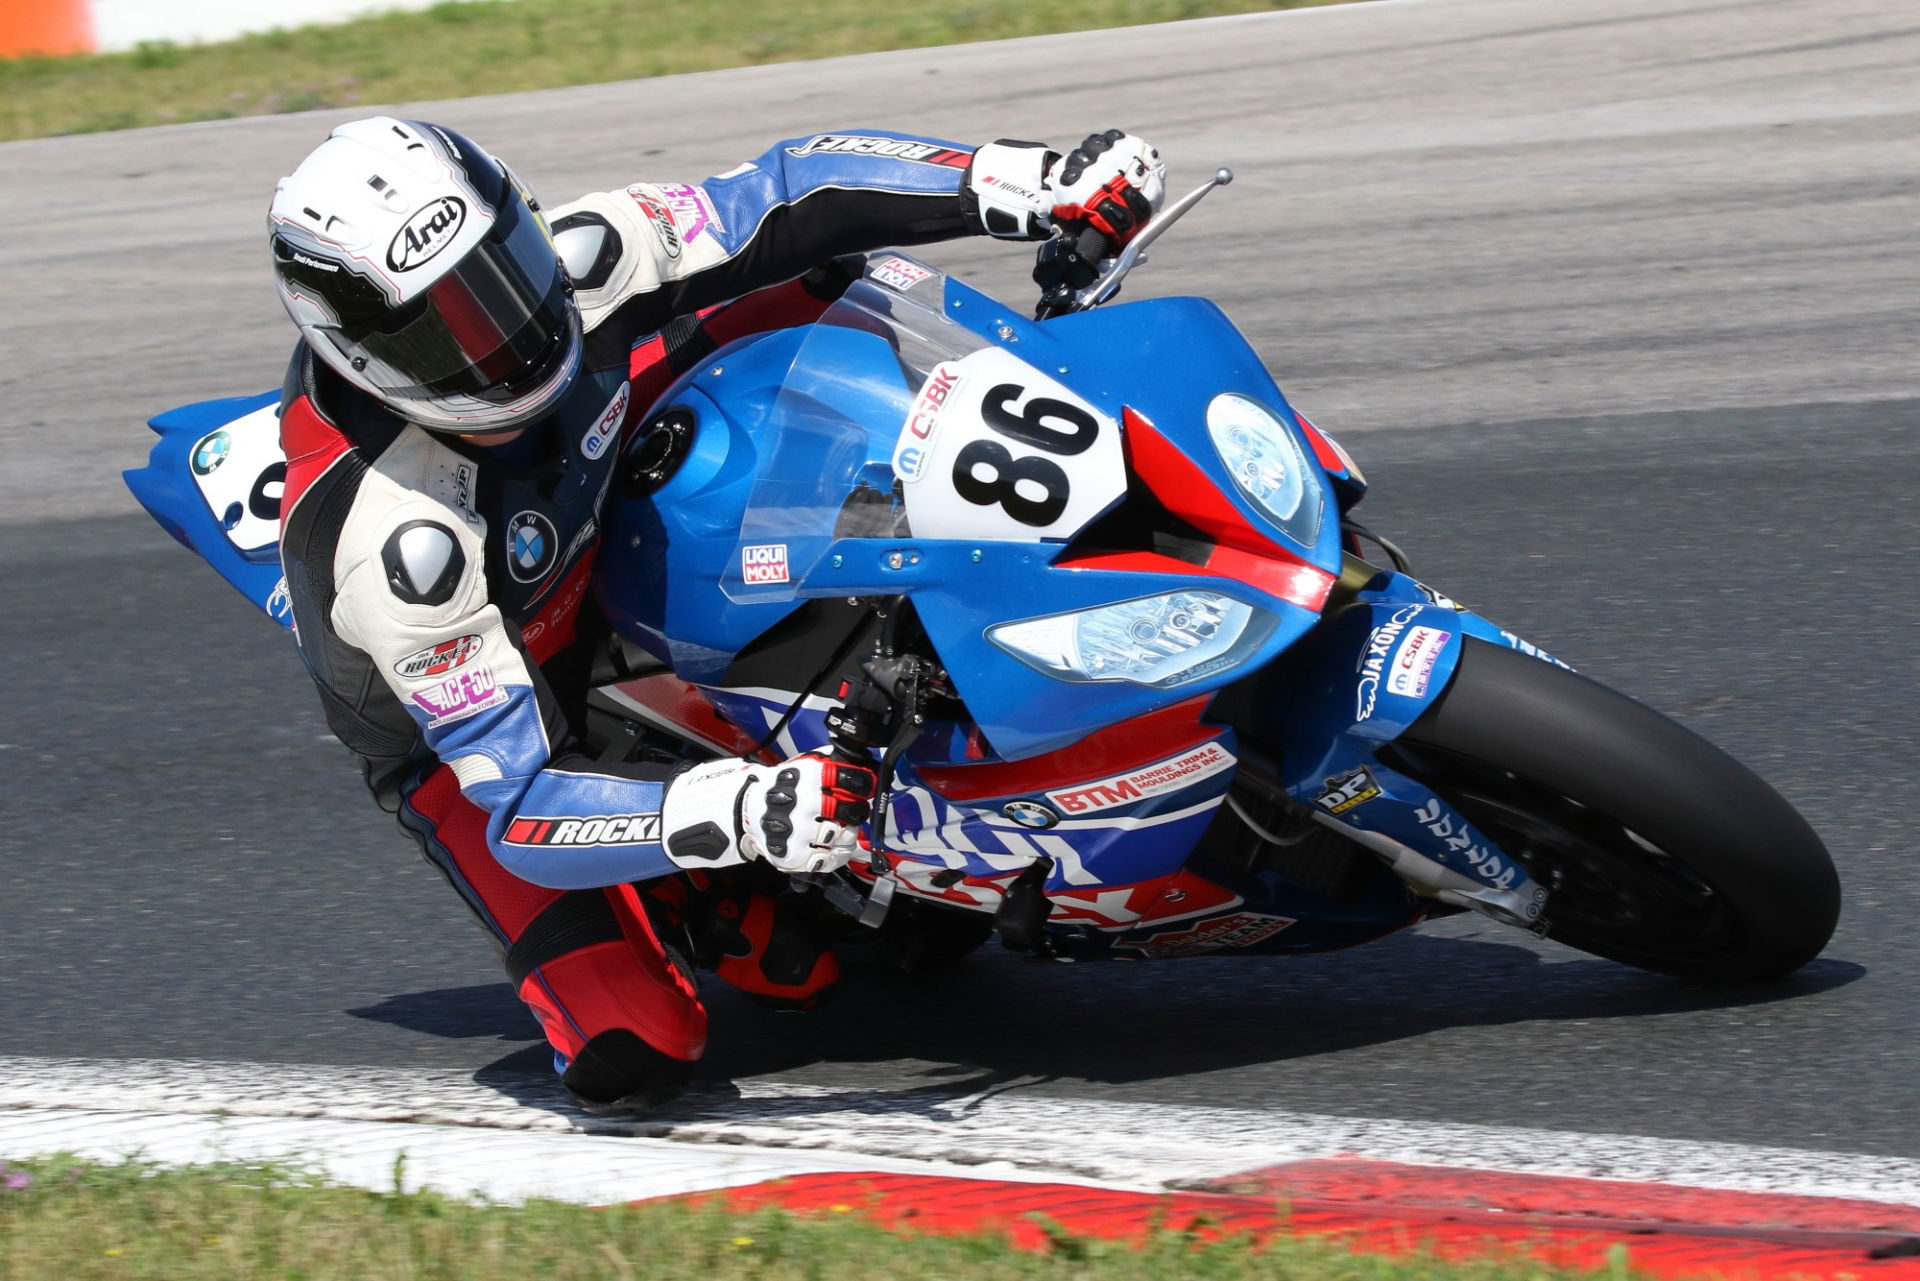 Ben Young, the 2019 Canadian Superbike Champion, was one of the top finishers in the 2019 BMW Motorrad Race Trophy competition. Photo by Ron O’Brien, courtesy of CSBK/PMP.